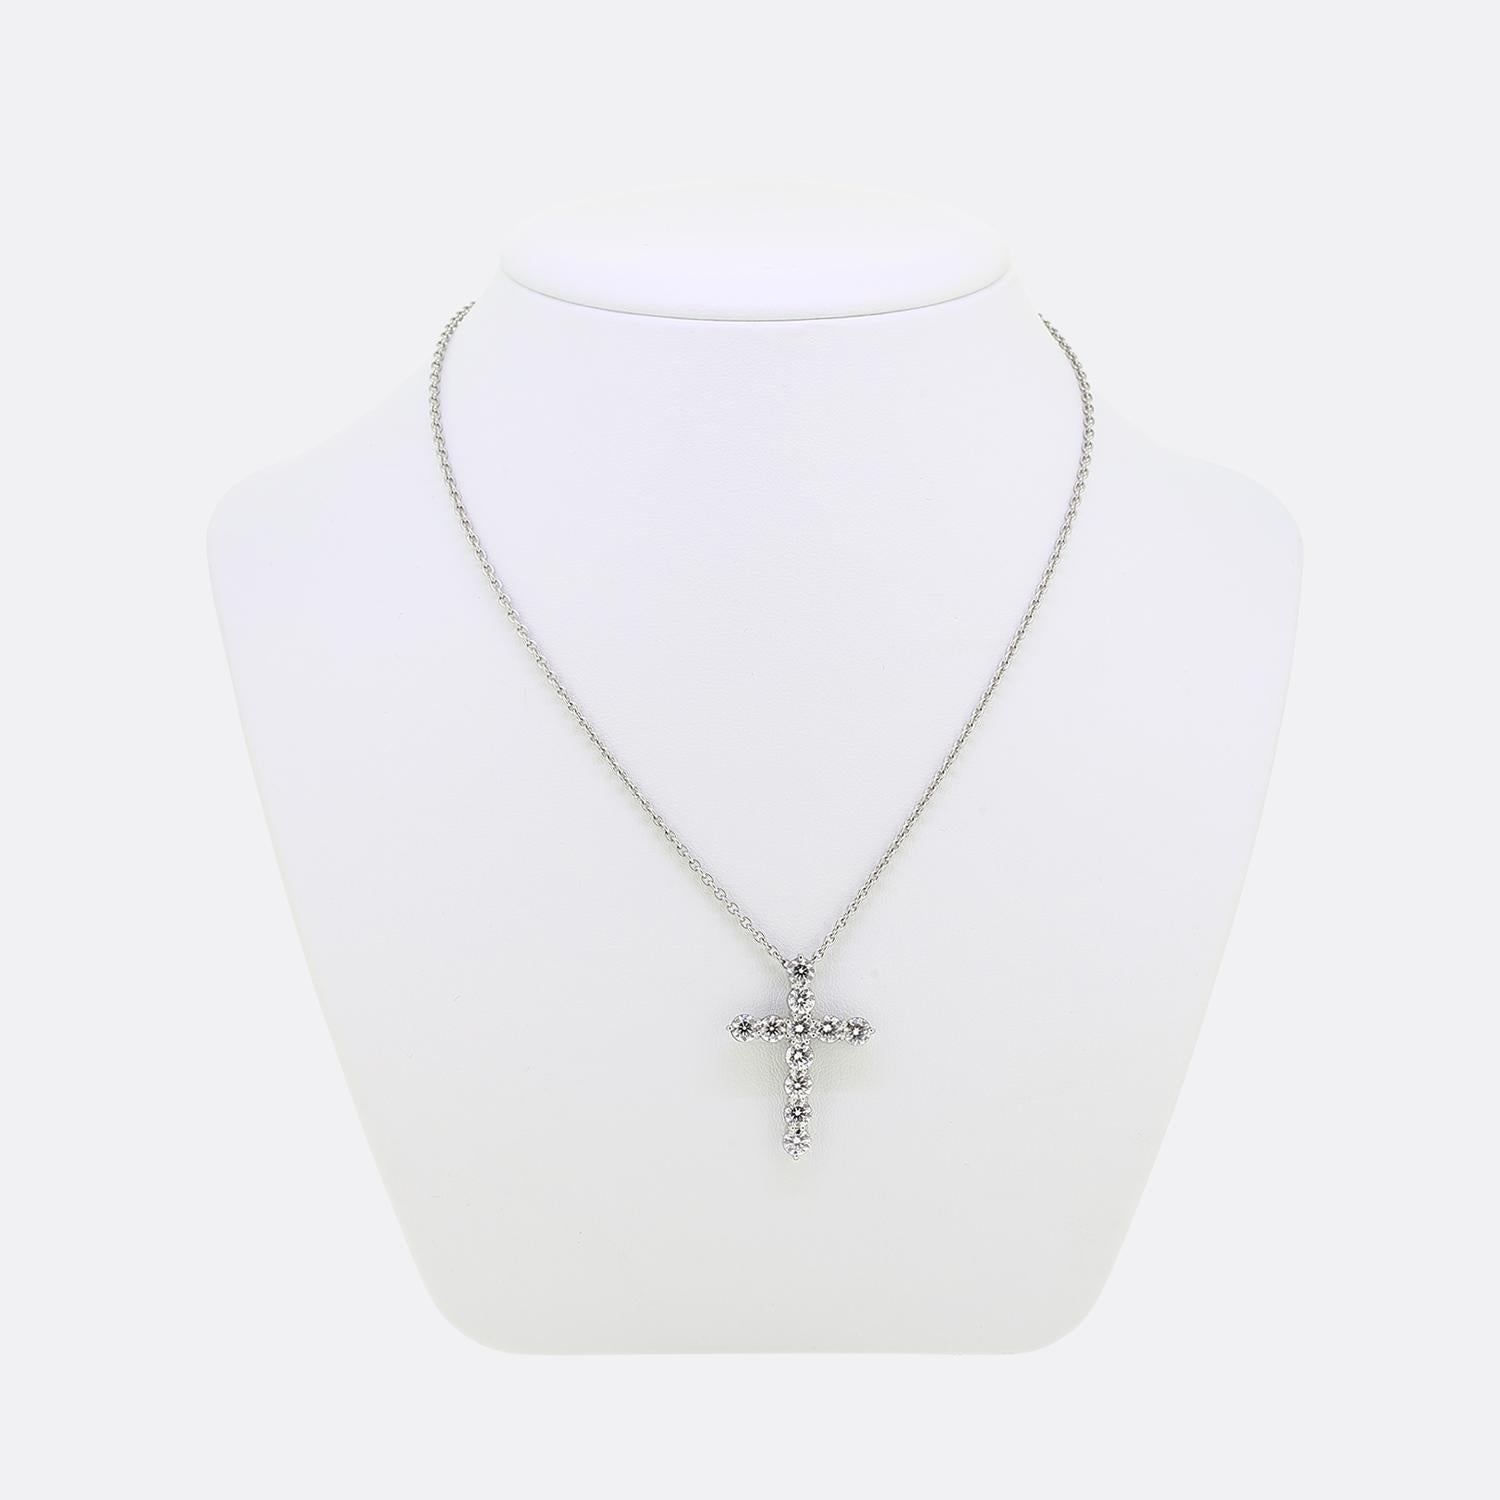 Here we have a platinum diamond cross pendant from the luxury jewellery designer Boodles. The cross features 11 perfectly matched round brilliant cut diamonds; all of which have been individually claw set and collectively weigh 2.80 carats. The